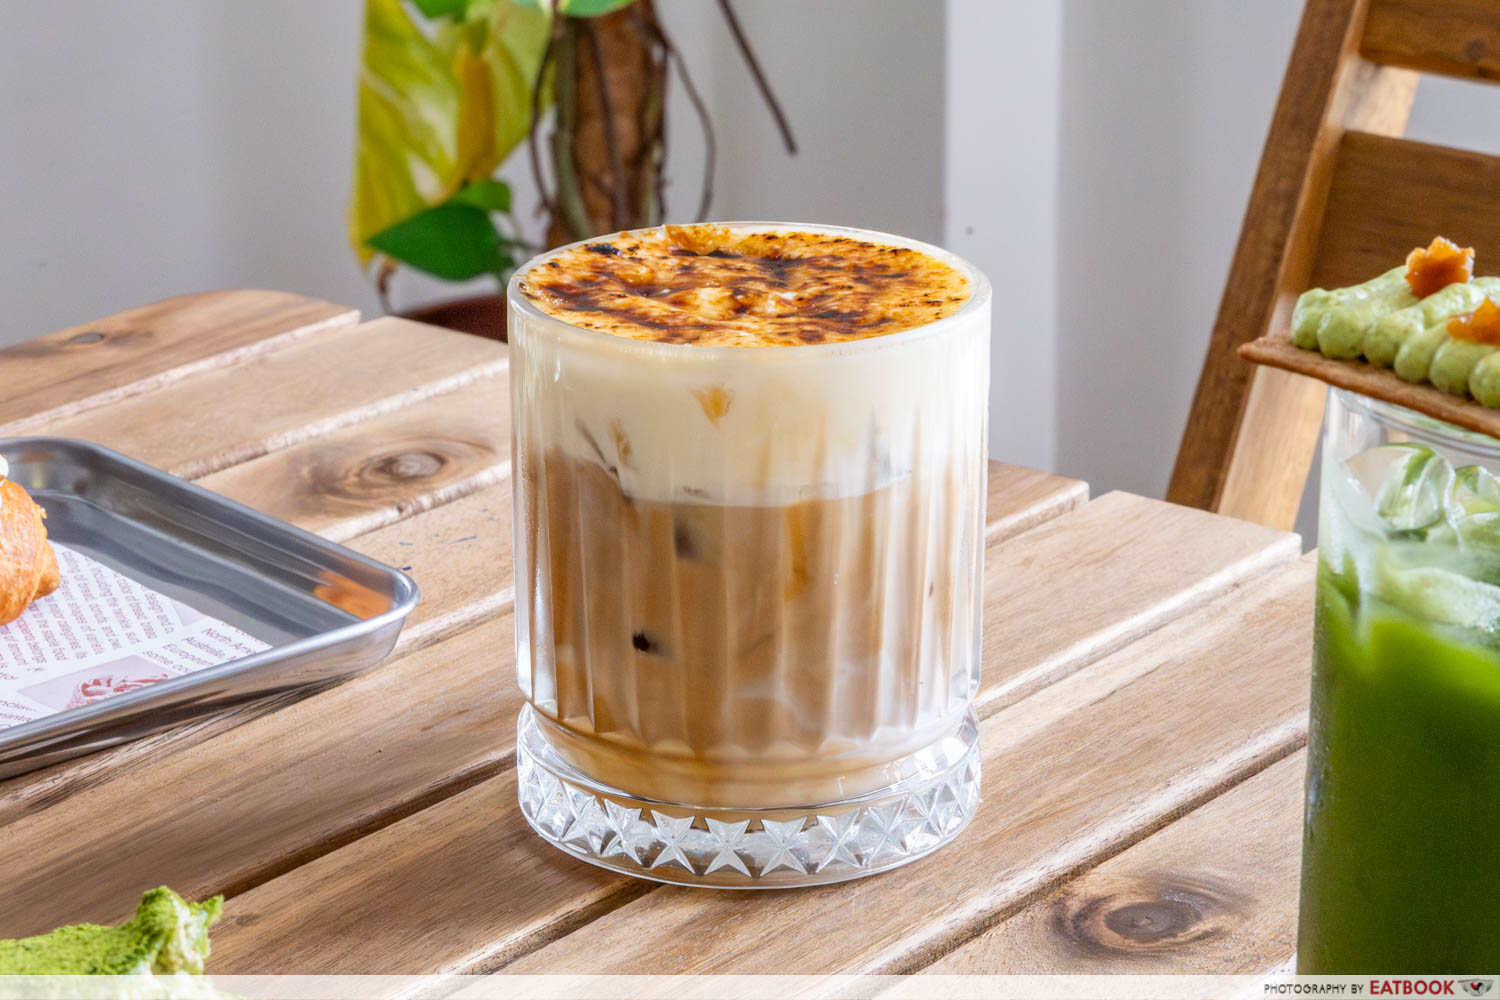 The-Blue-Door-Coffe-House-creme-brulee-latte